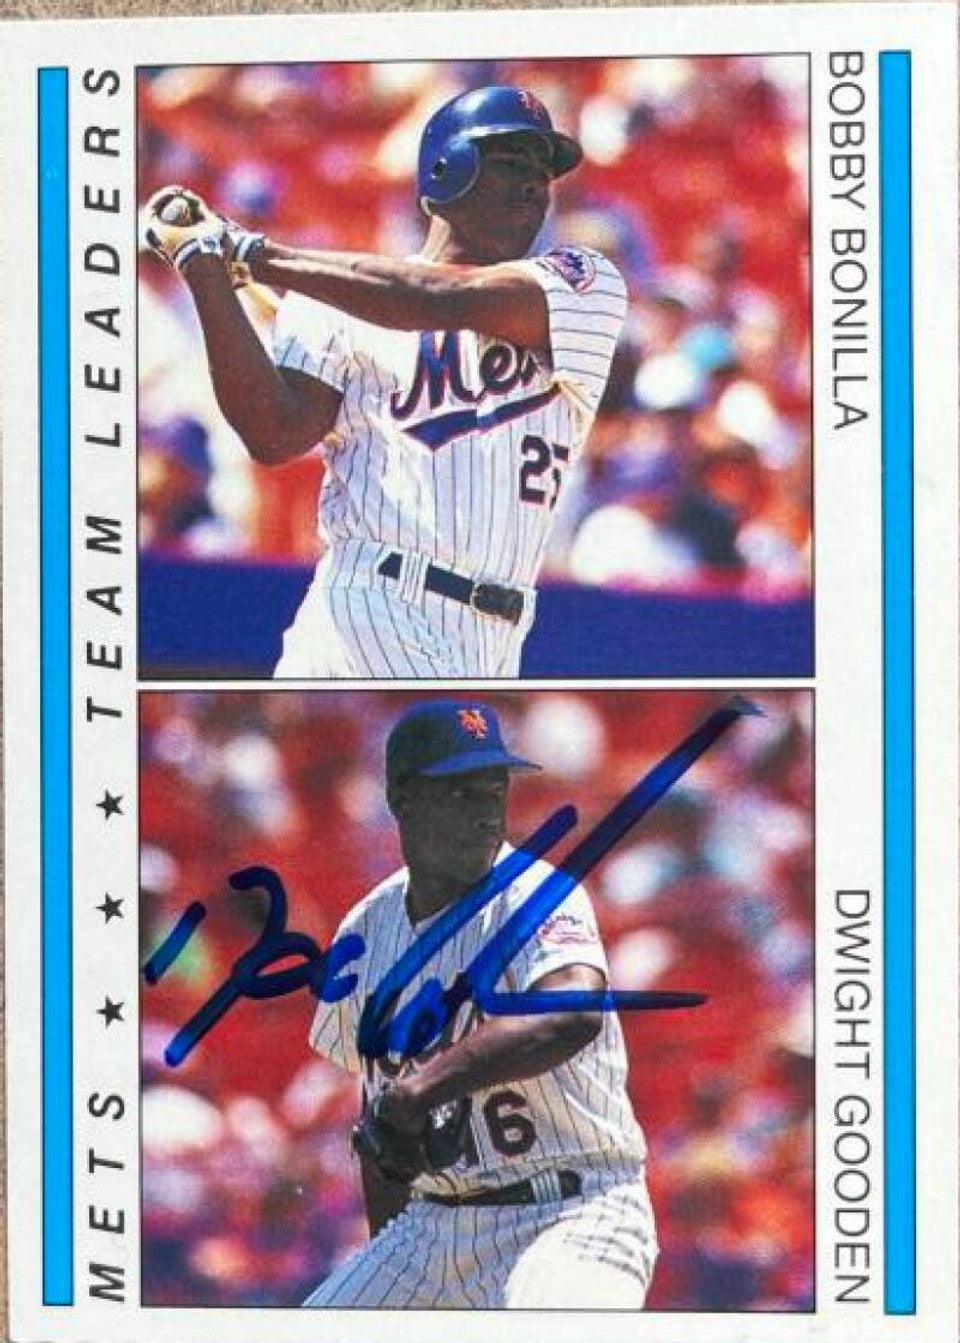 Dwight Gooden Signed 1994 Red Foley Baseball Card - New York Mets - PastPros